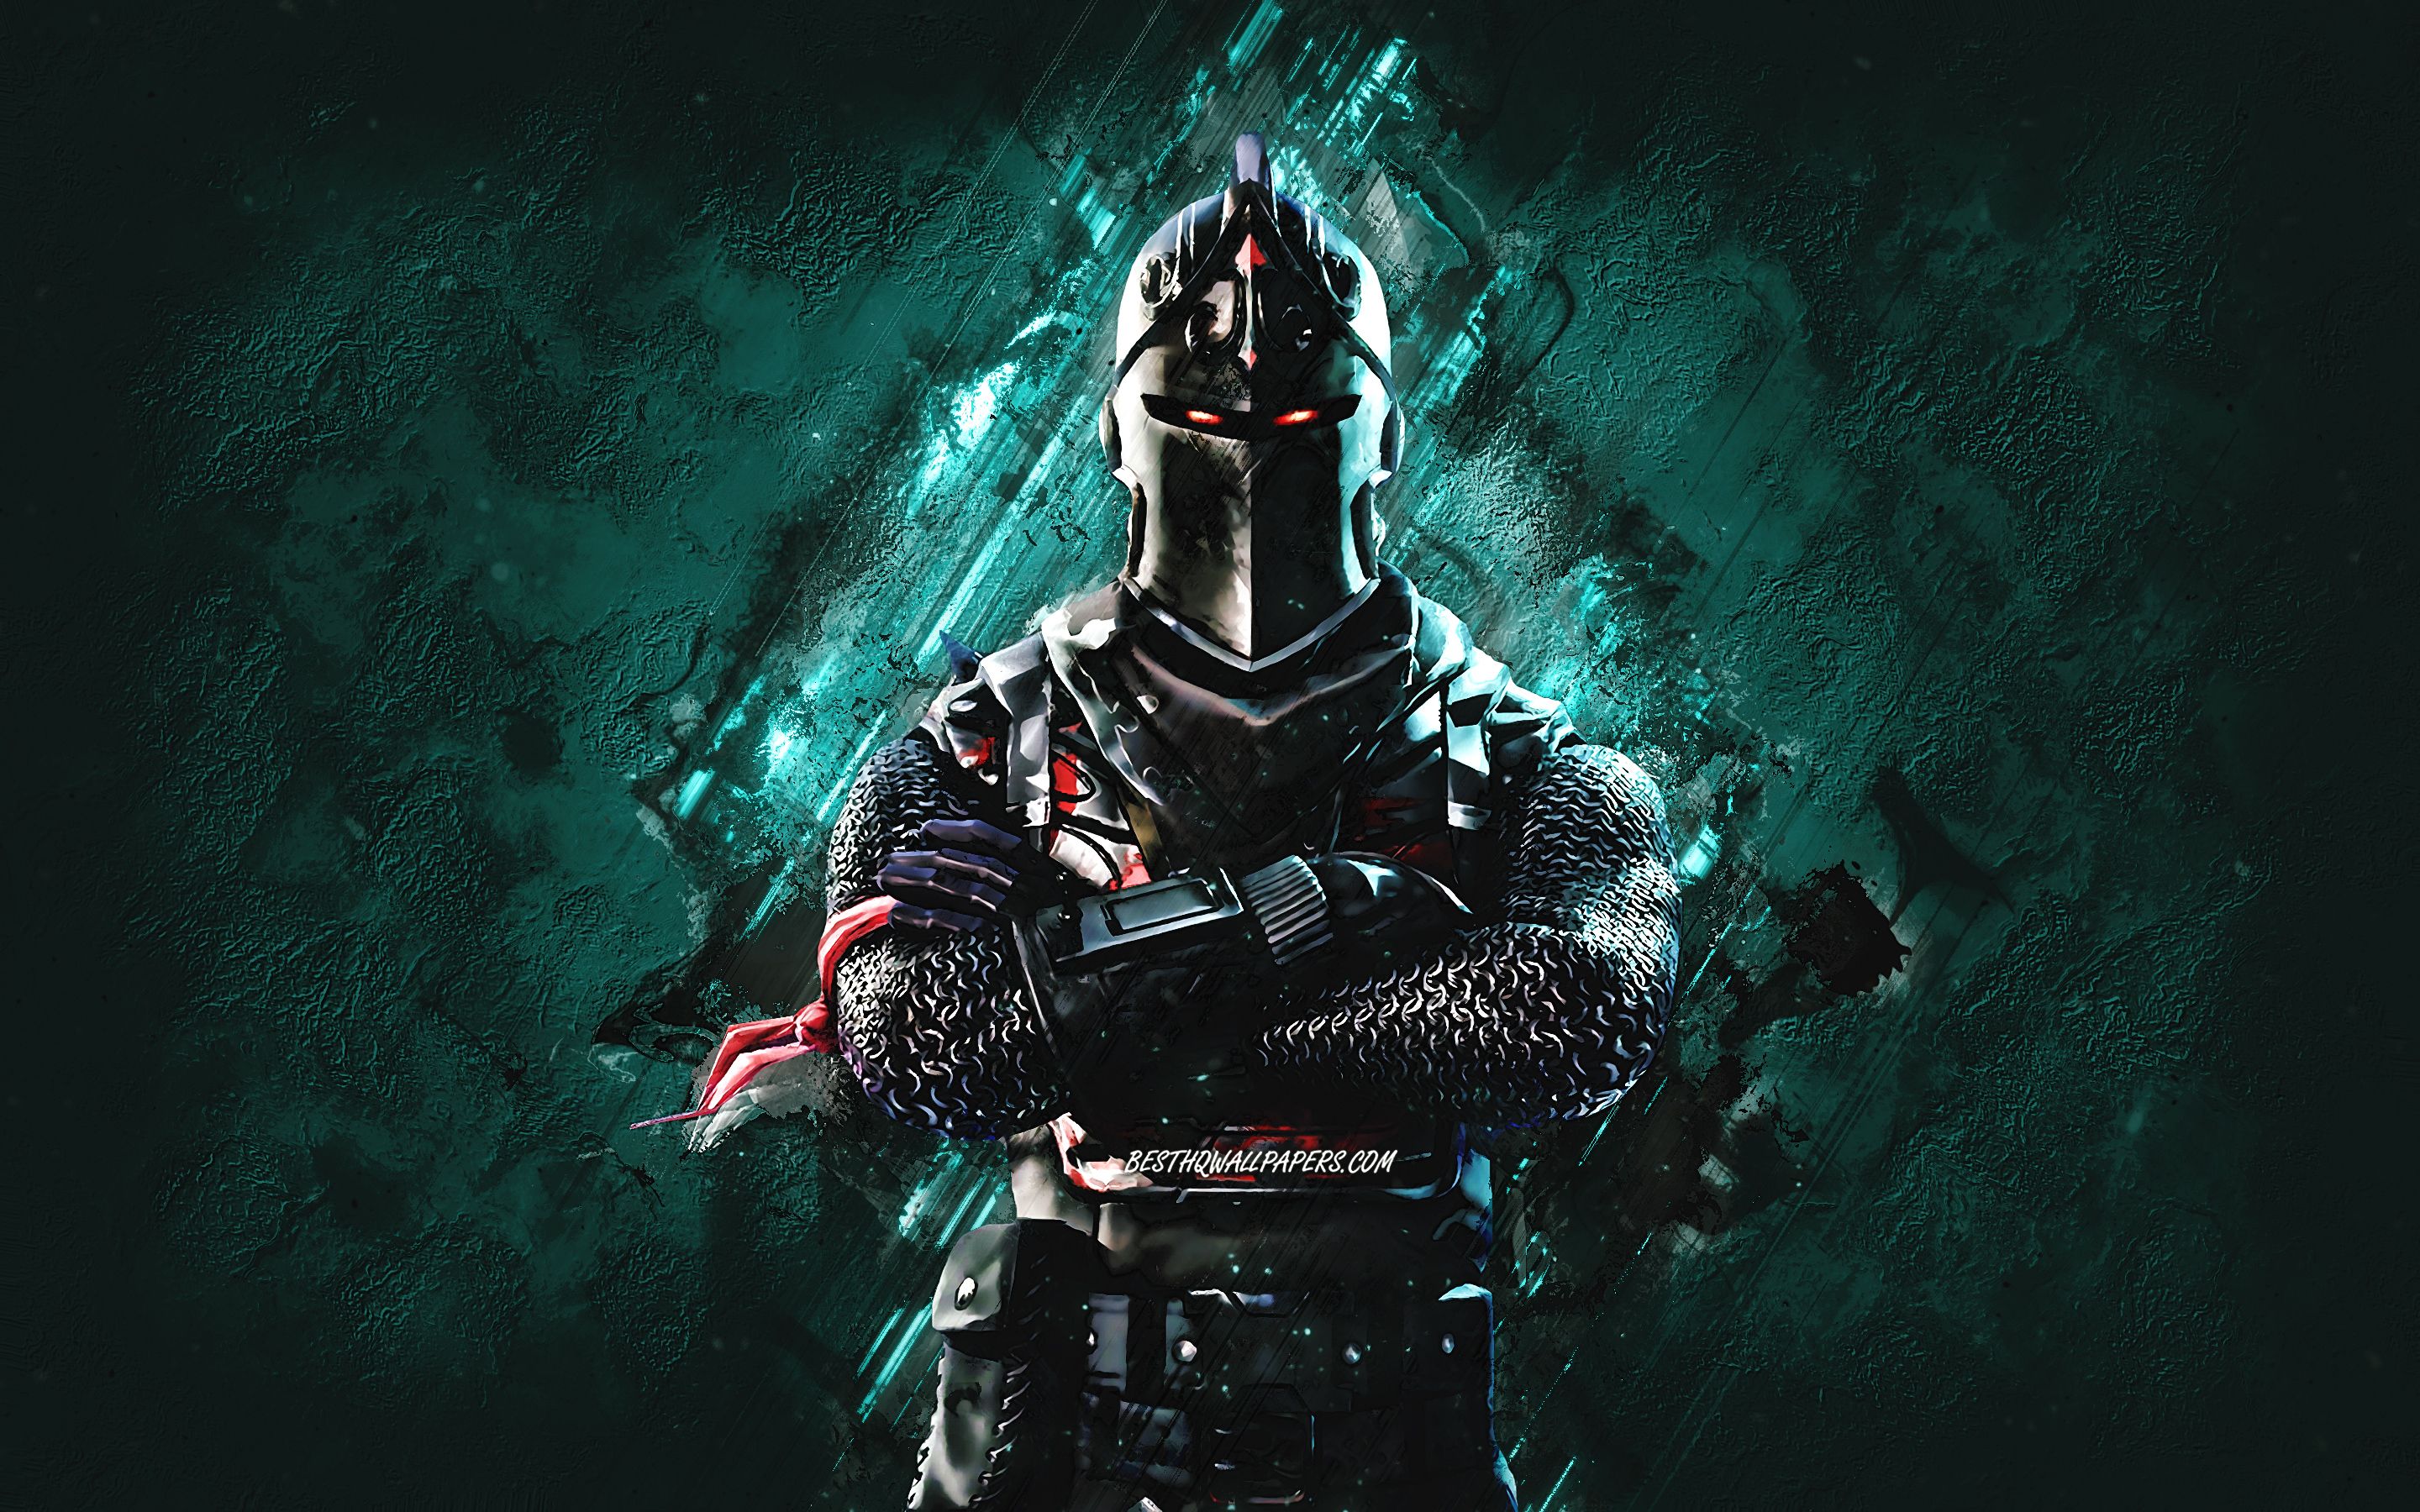 Cool Black Knight / Cool Gaming Backgrounds Fortnite Black Knight Page